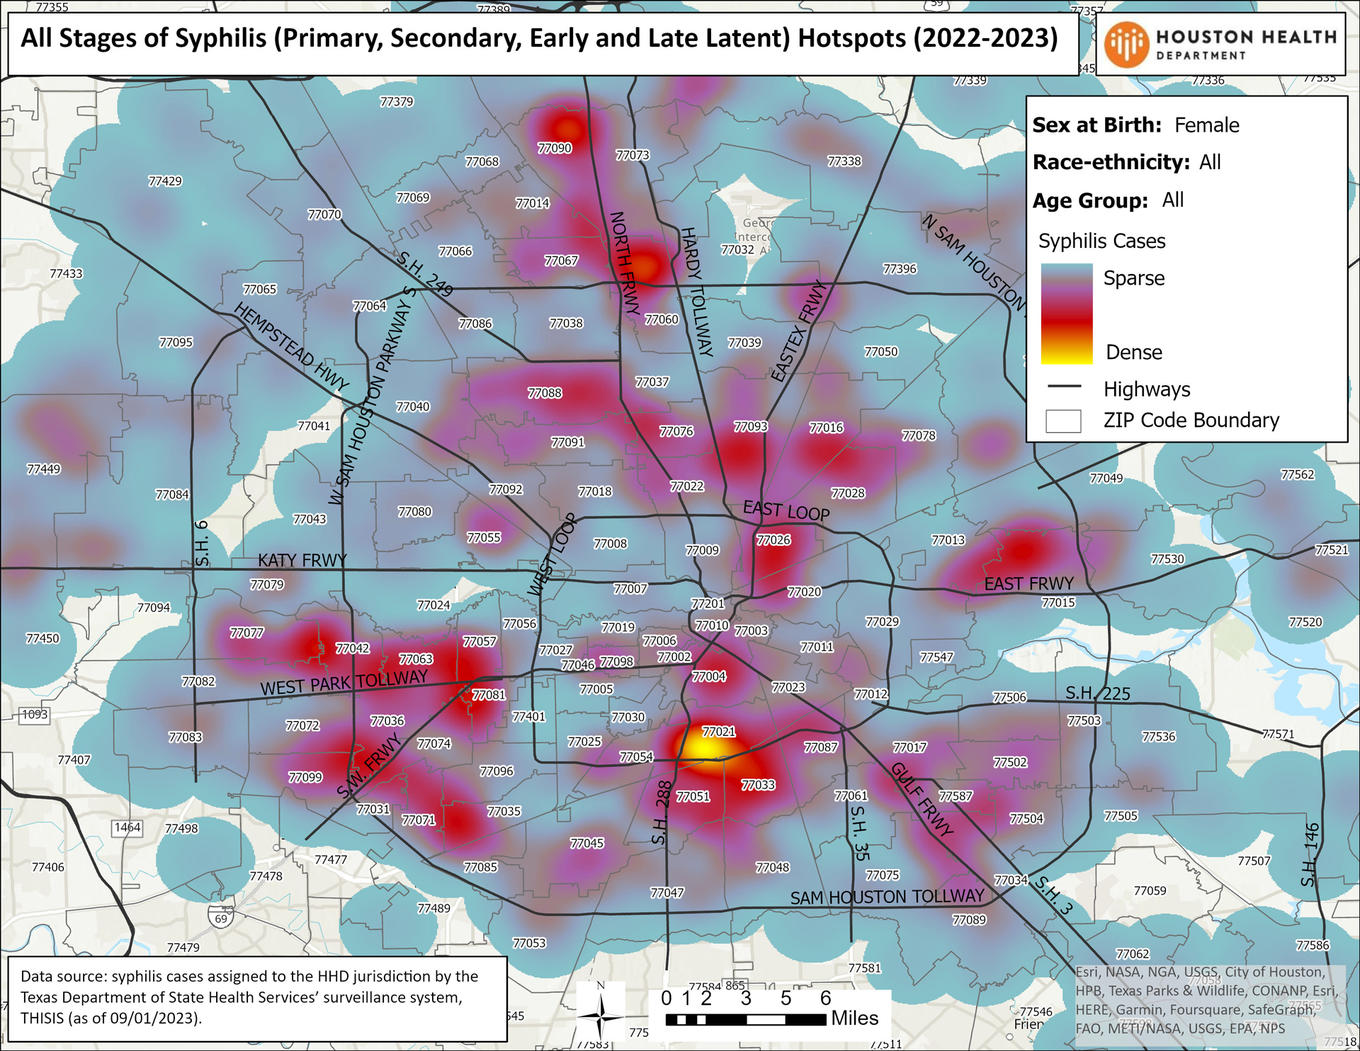 All stages of syphilis (primary, secondary, early and late latent) hotspots (2022-2023). Sex at birth: female